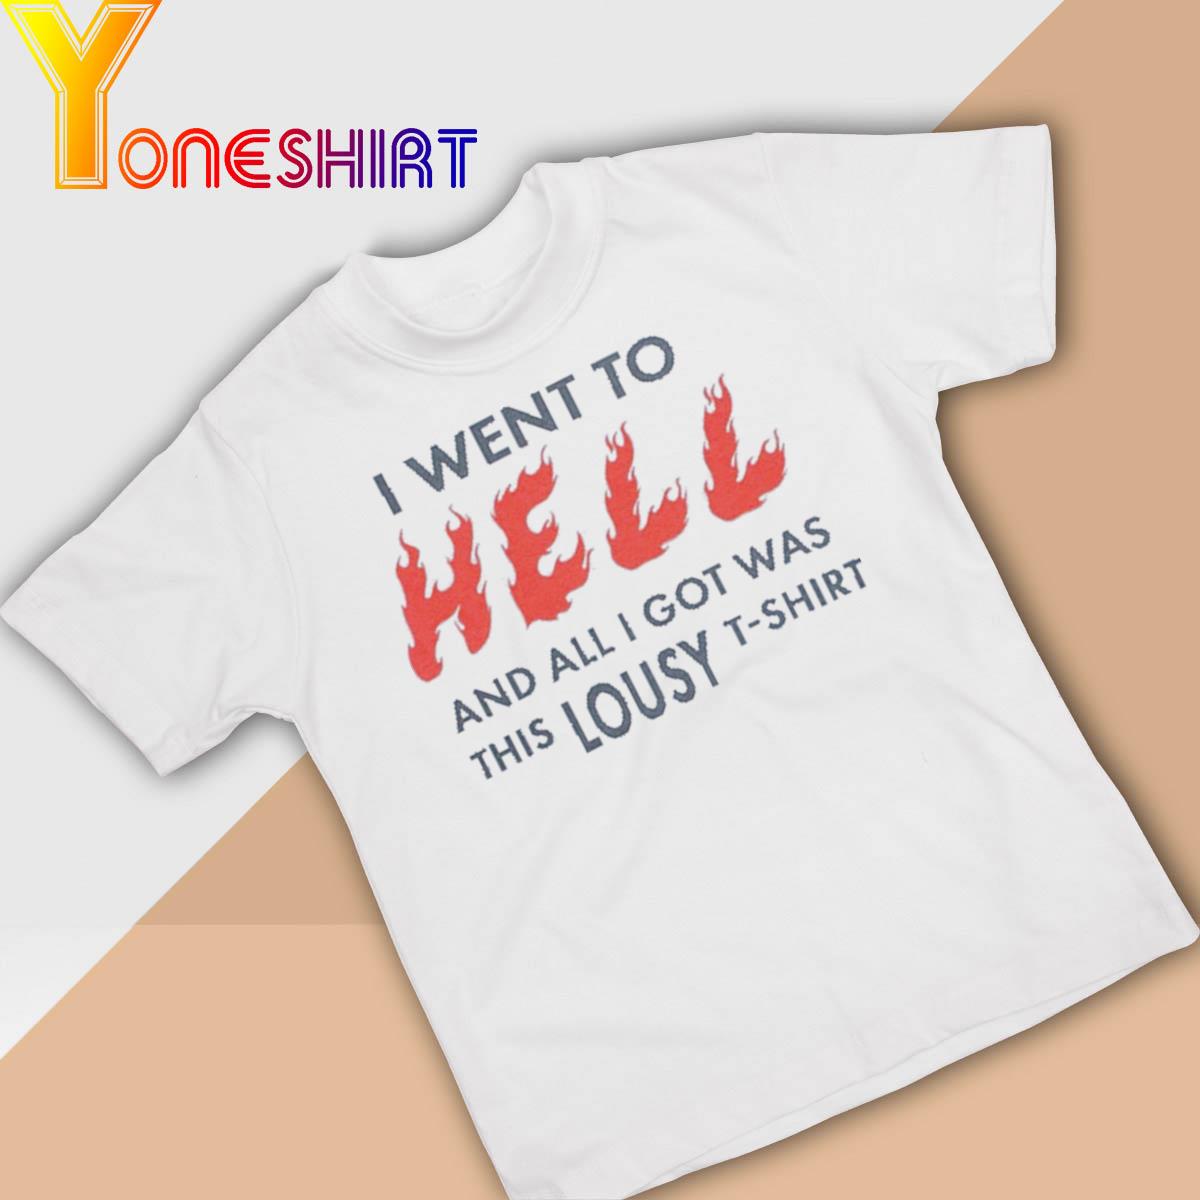 I went to Hell and all I got was this Lousy shirt